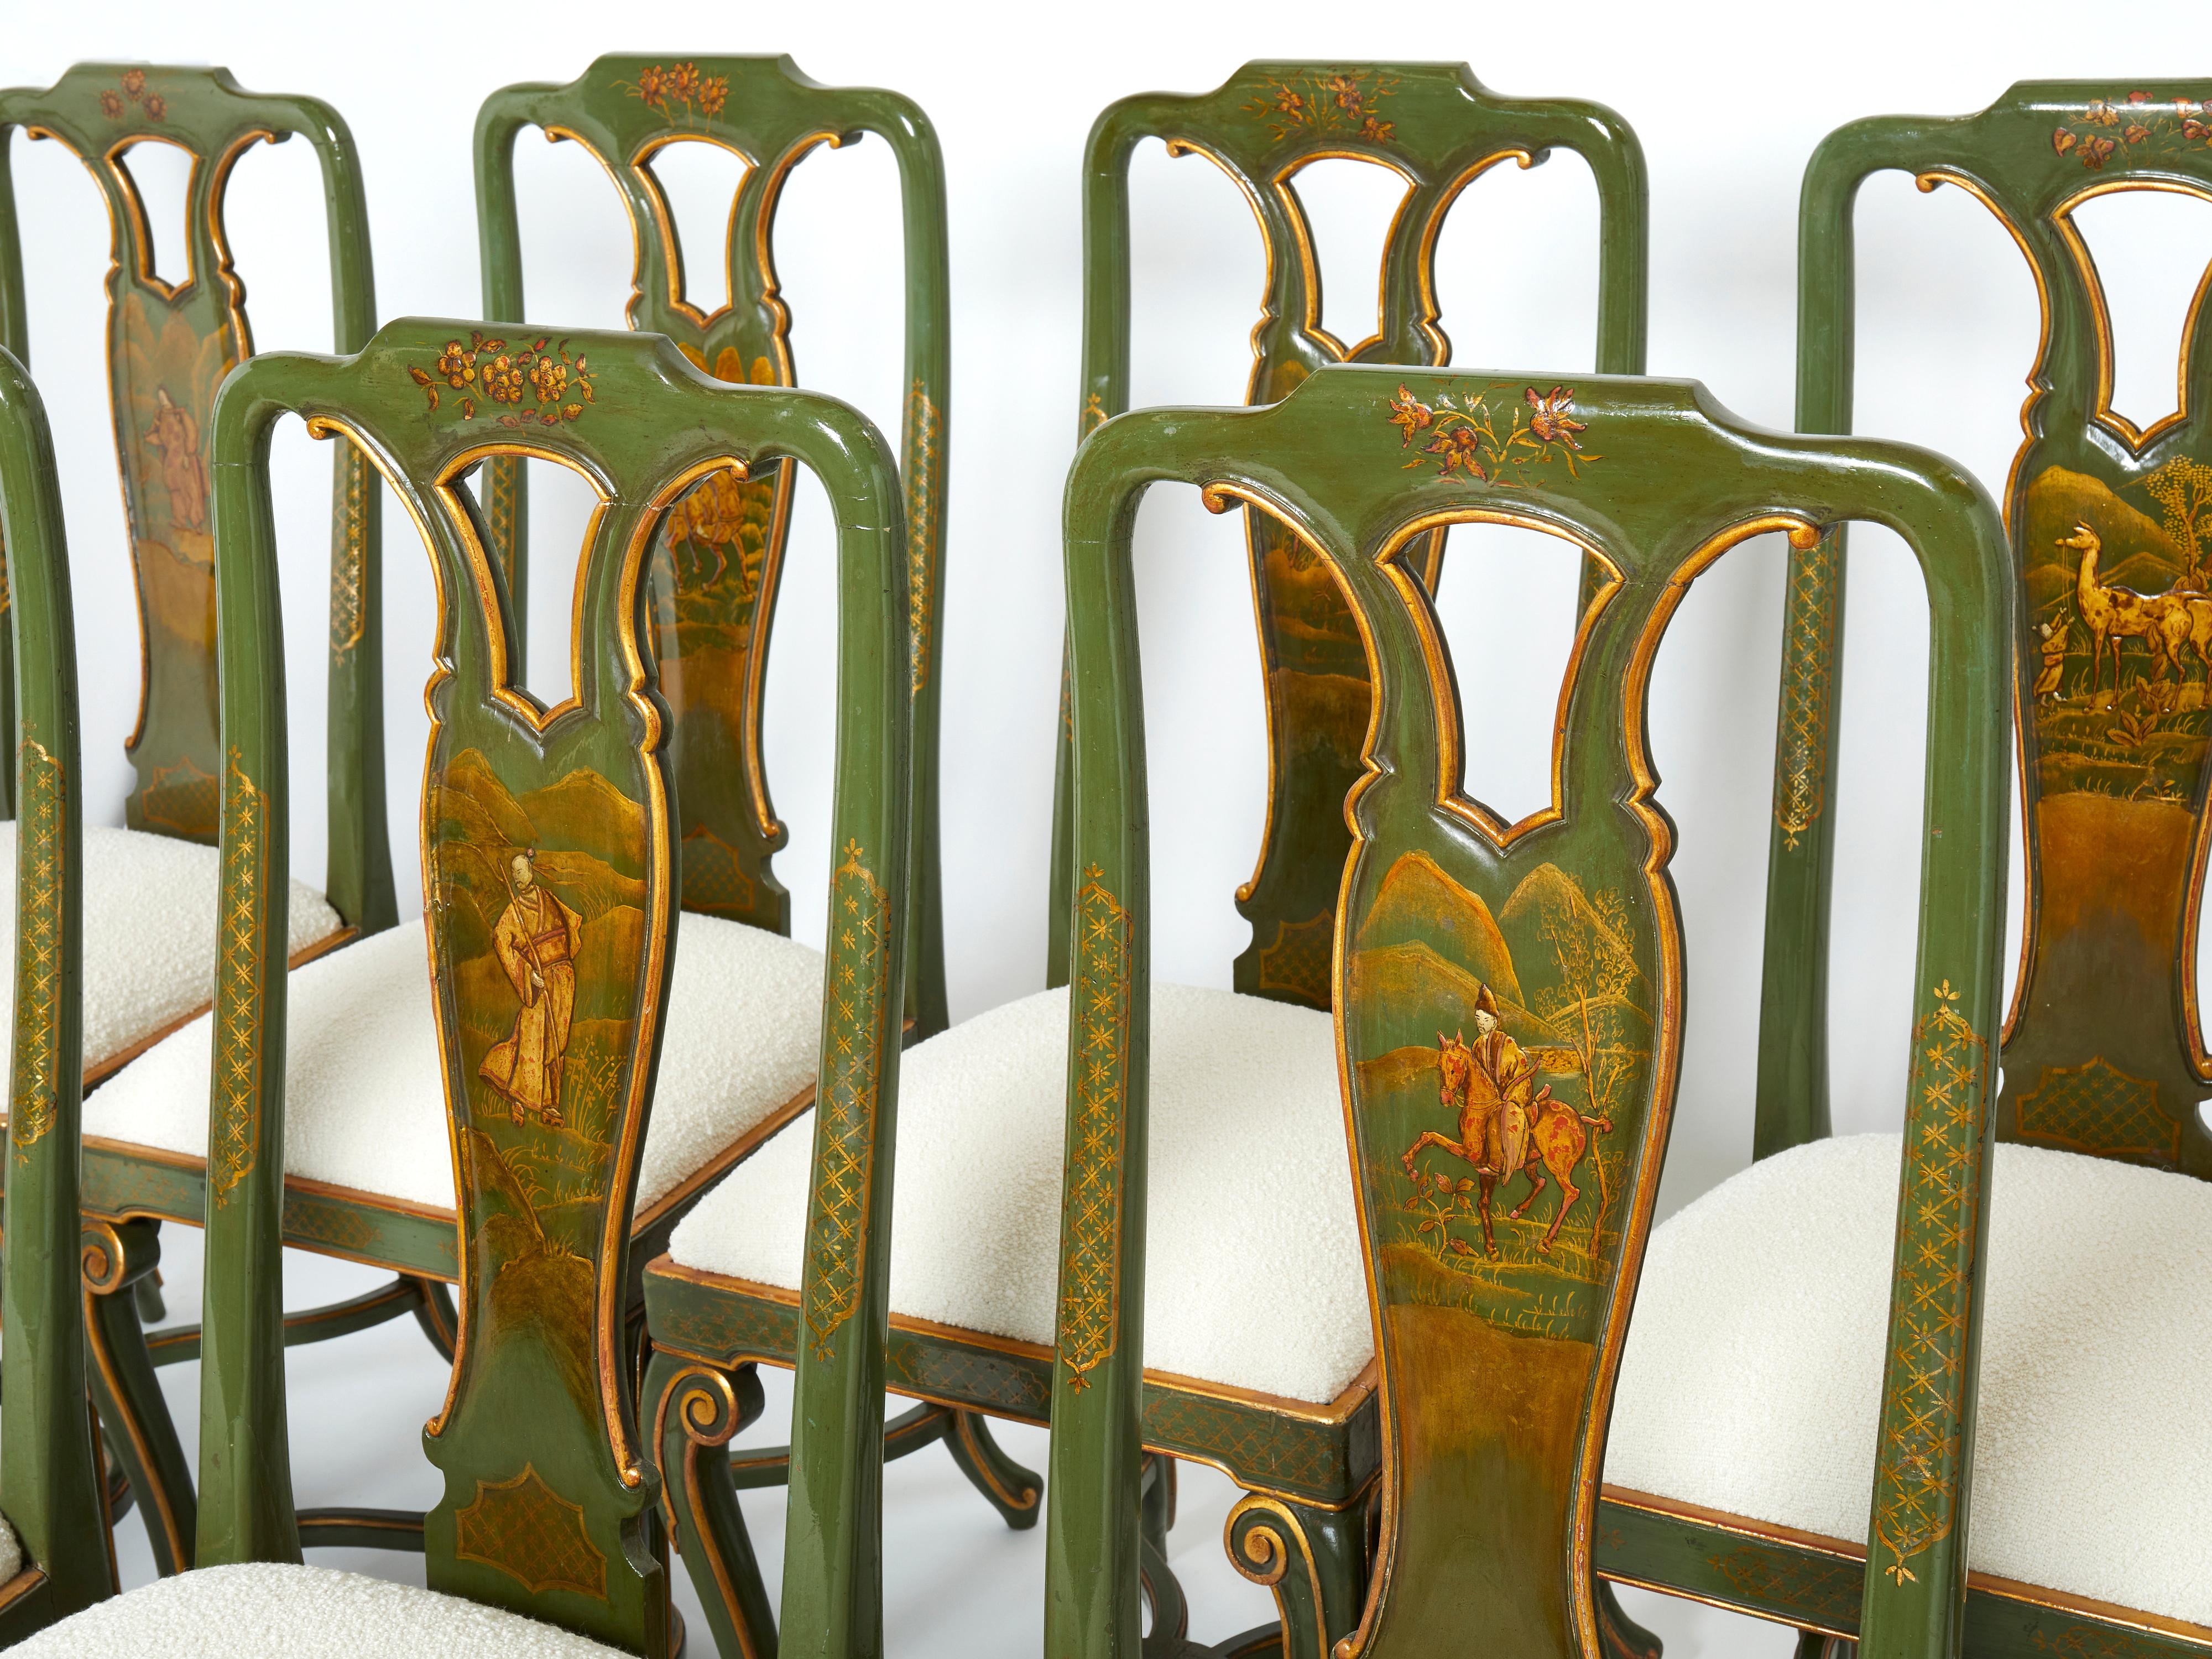 Unique set of ten green lacquered dining chairs made by Maison Jansen in the 1940s from the chinoiserie revival period of the early 20th century. The English Queen Anne style chairs were crafted with hardwood frames with Japanned finish. Decorated